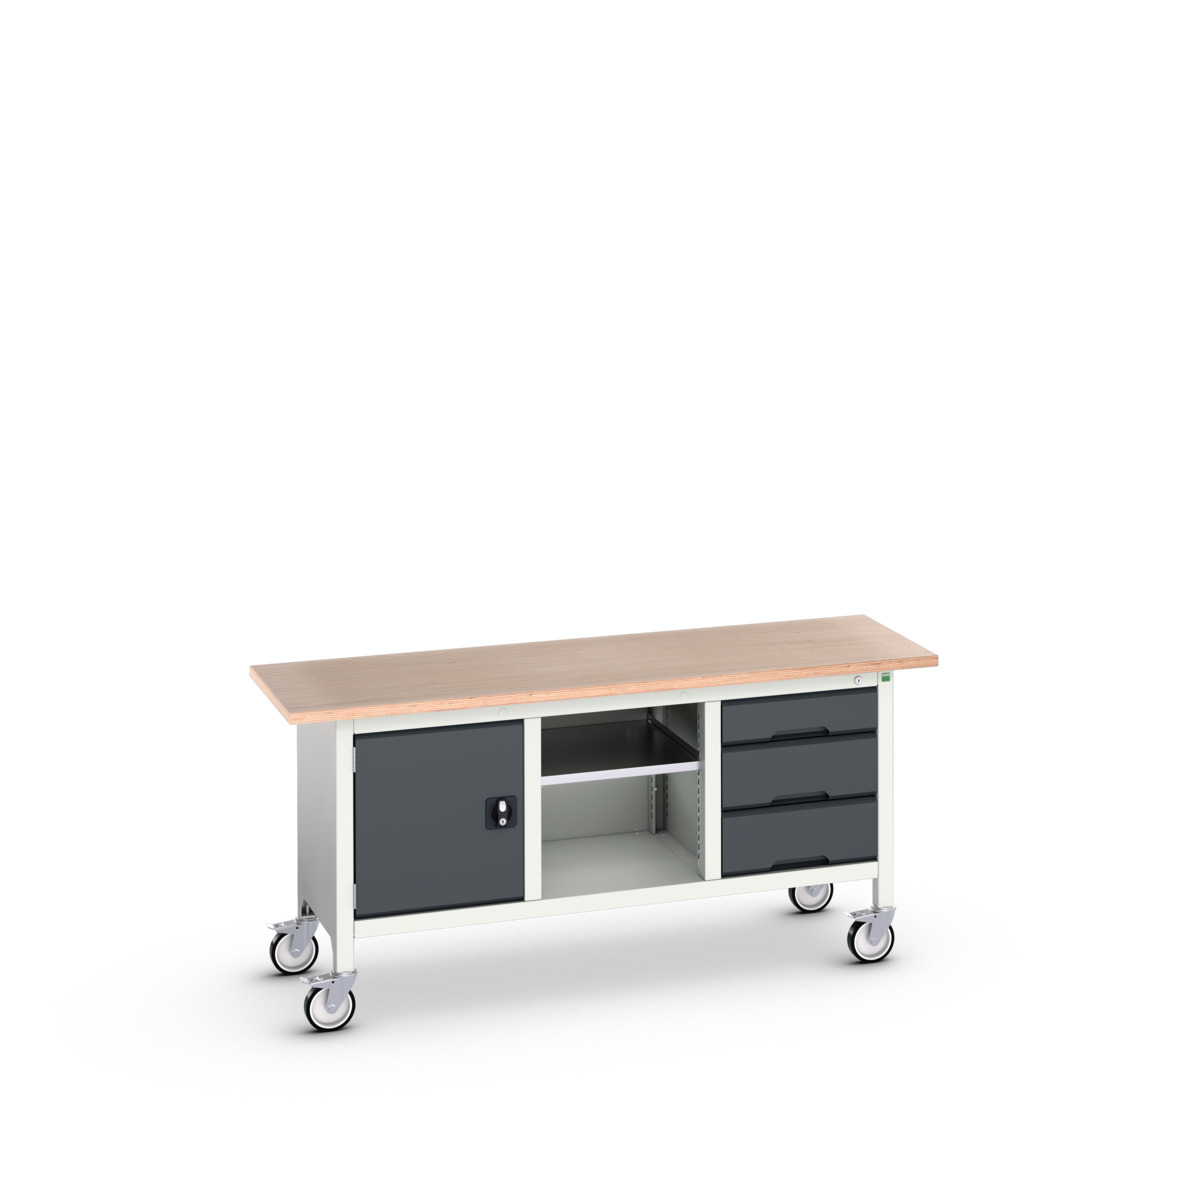 16923220.19 - verso mobile storage bench (mpx)